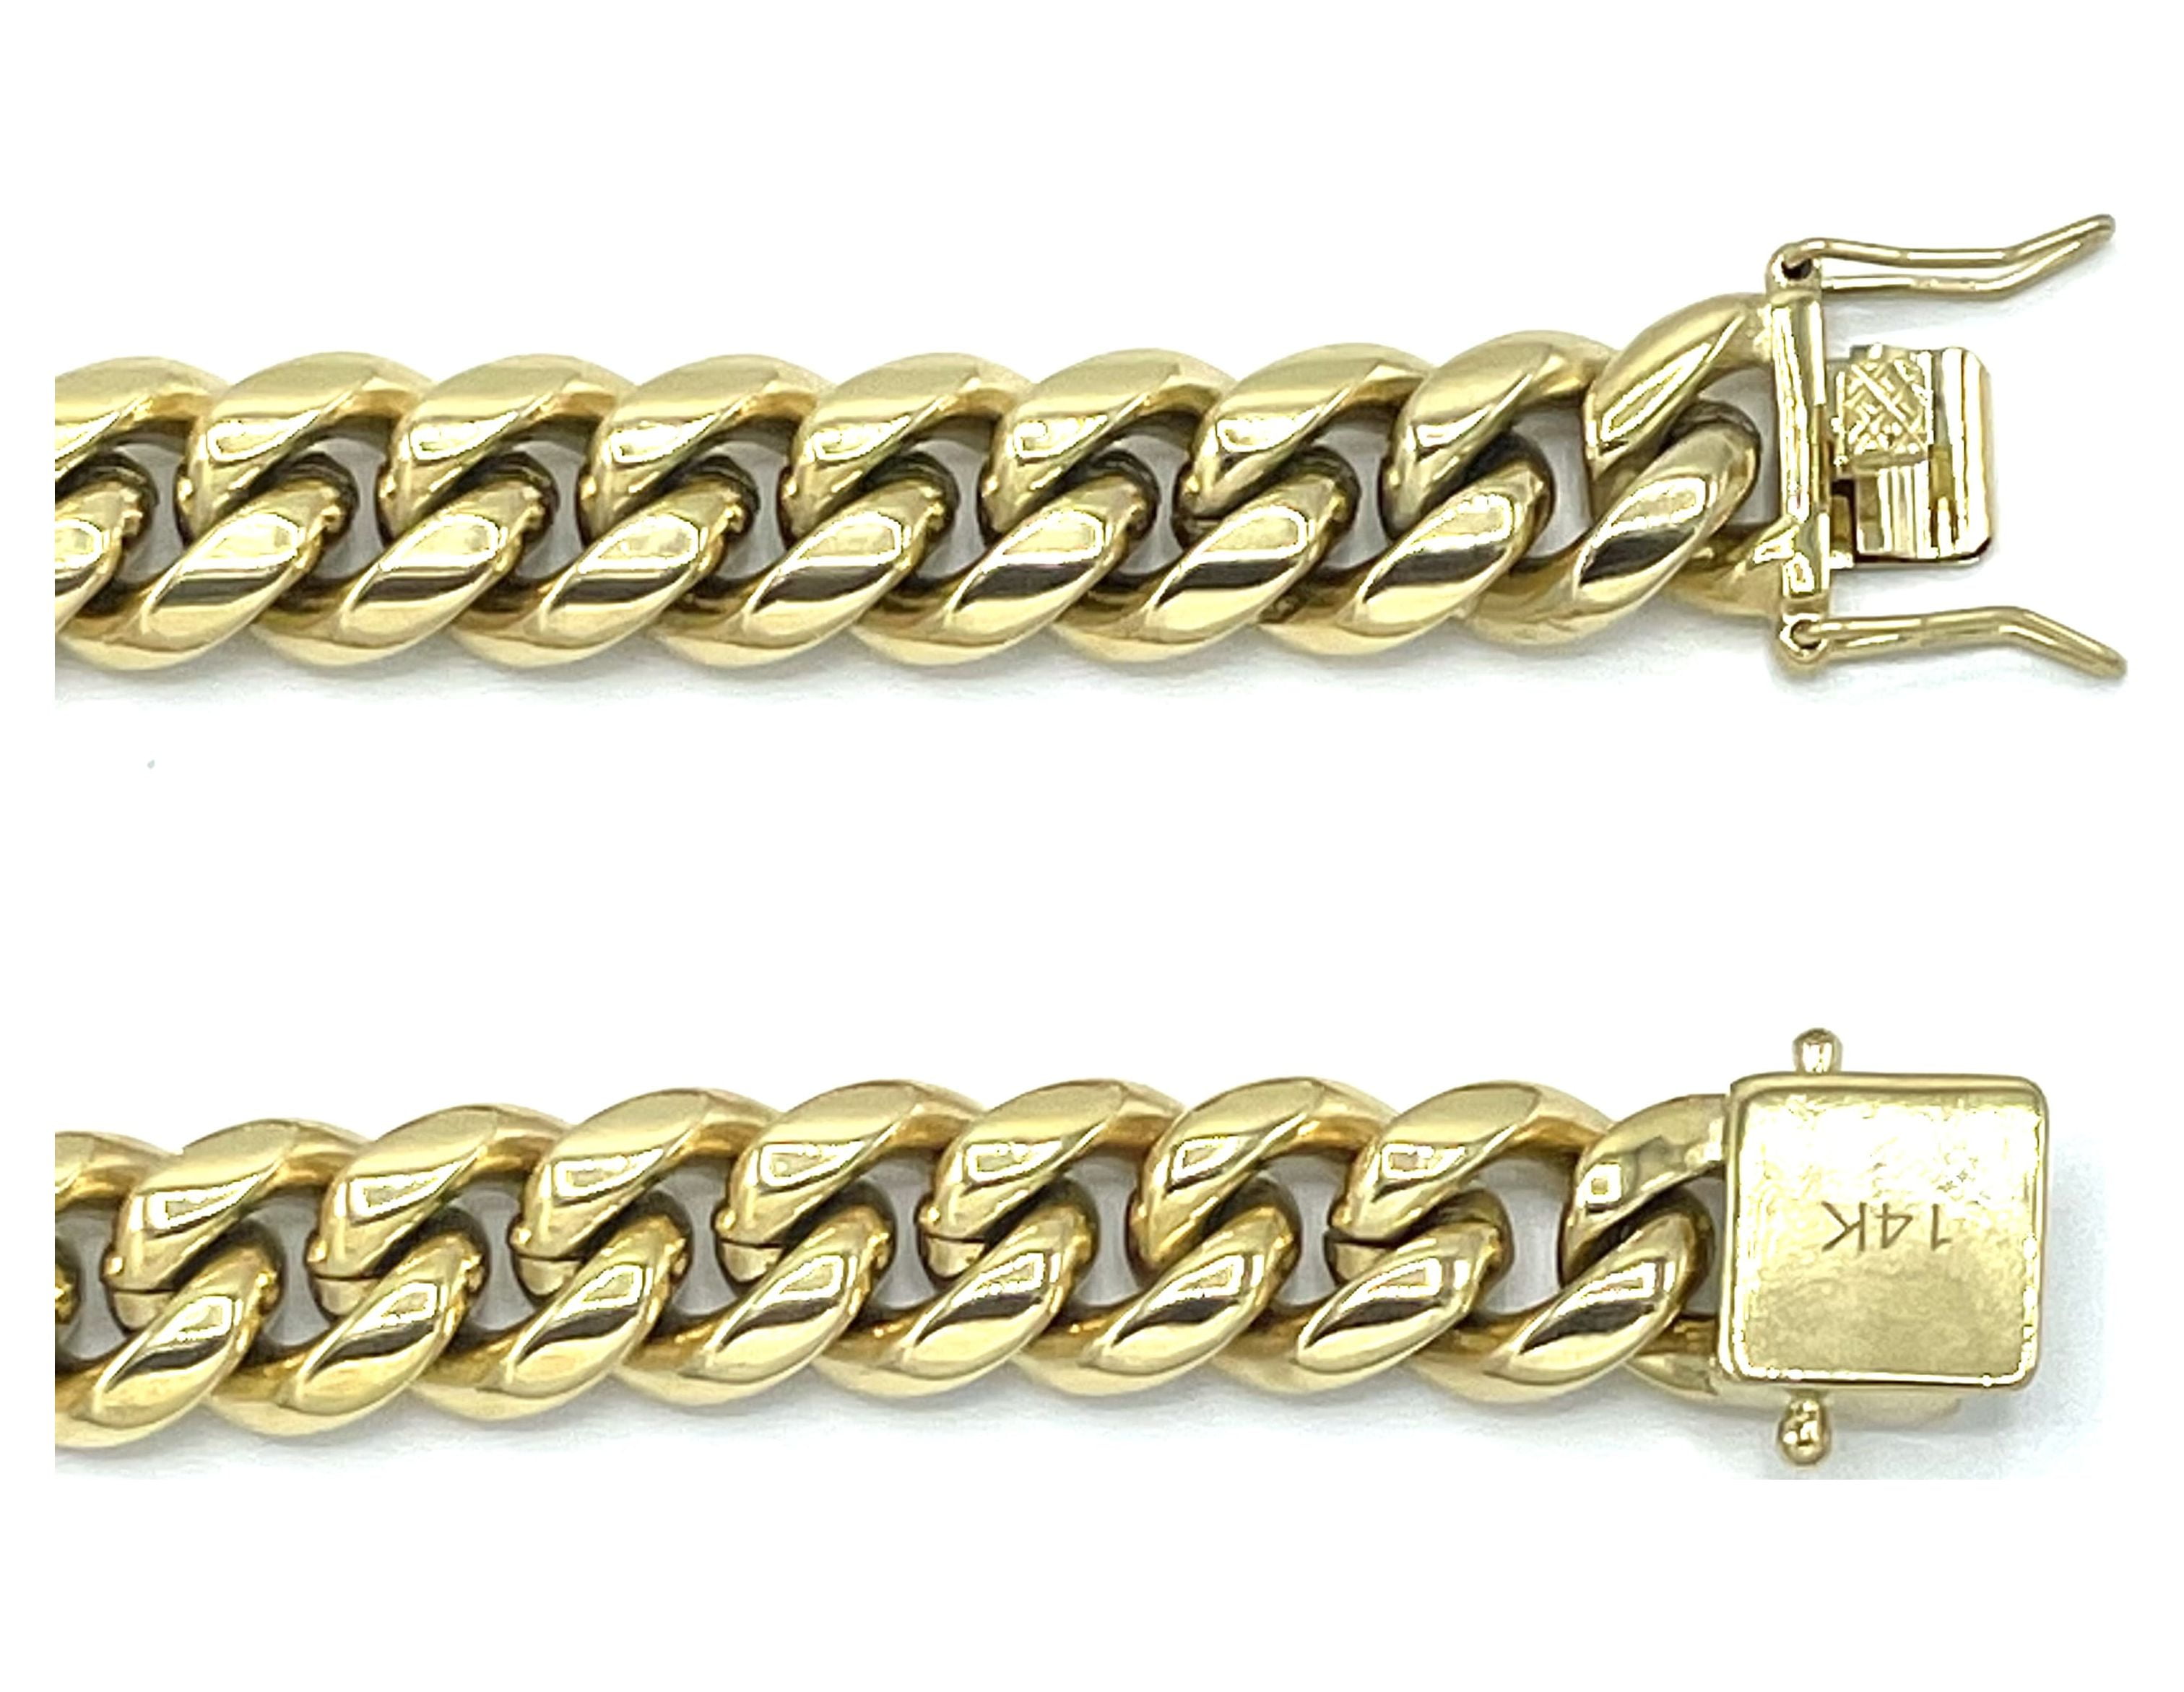 14mm Cuban Link Chain in 14K Solid Gold